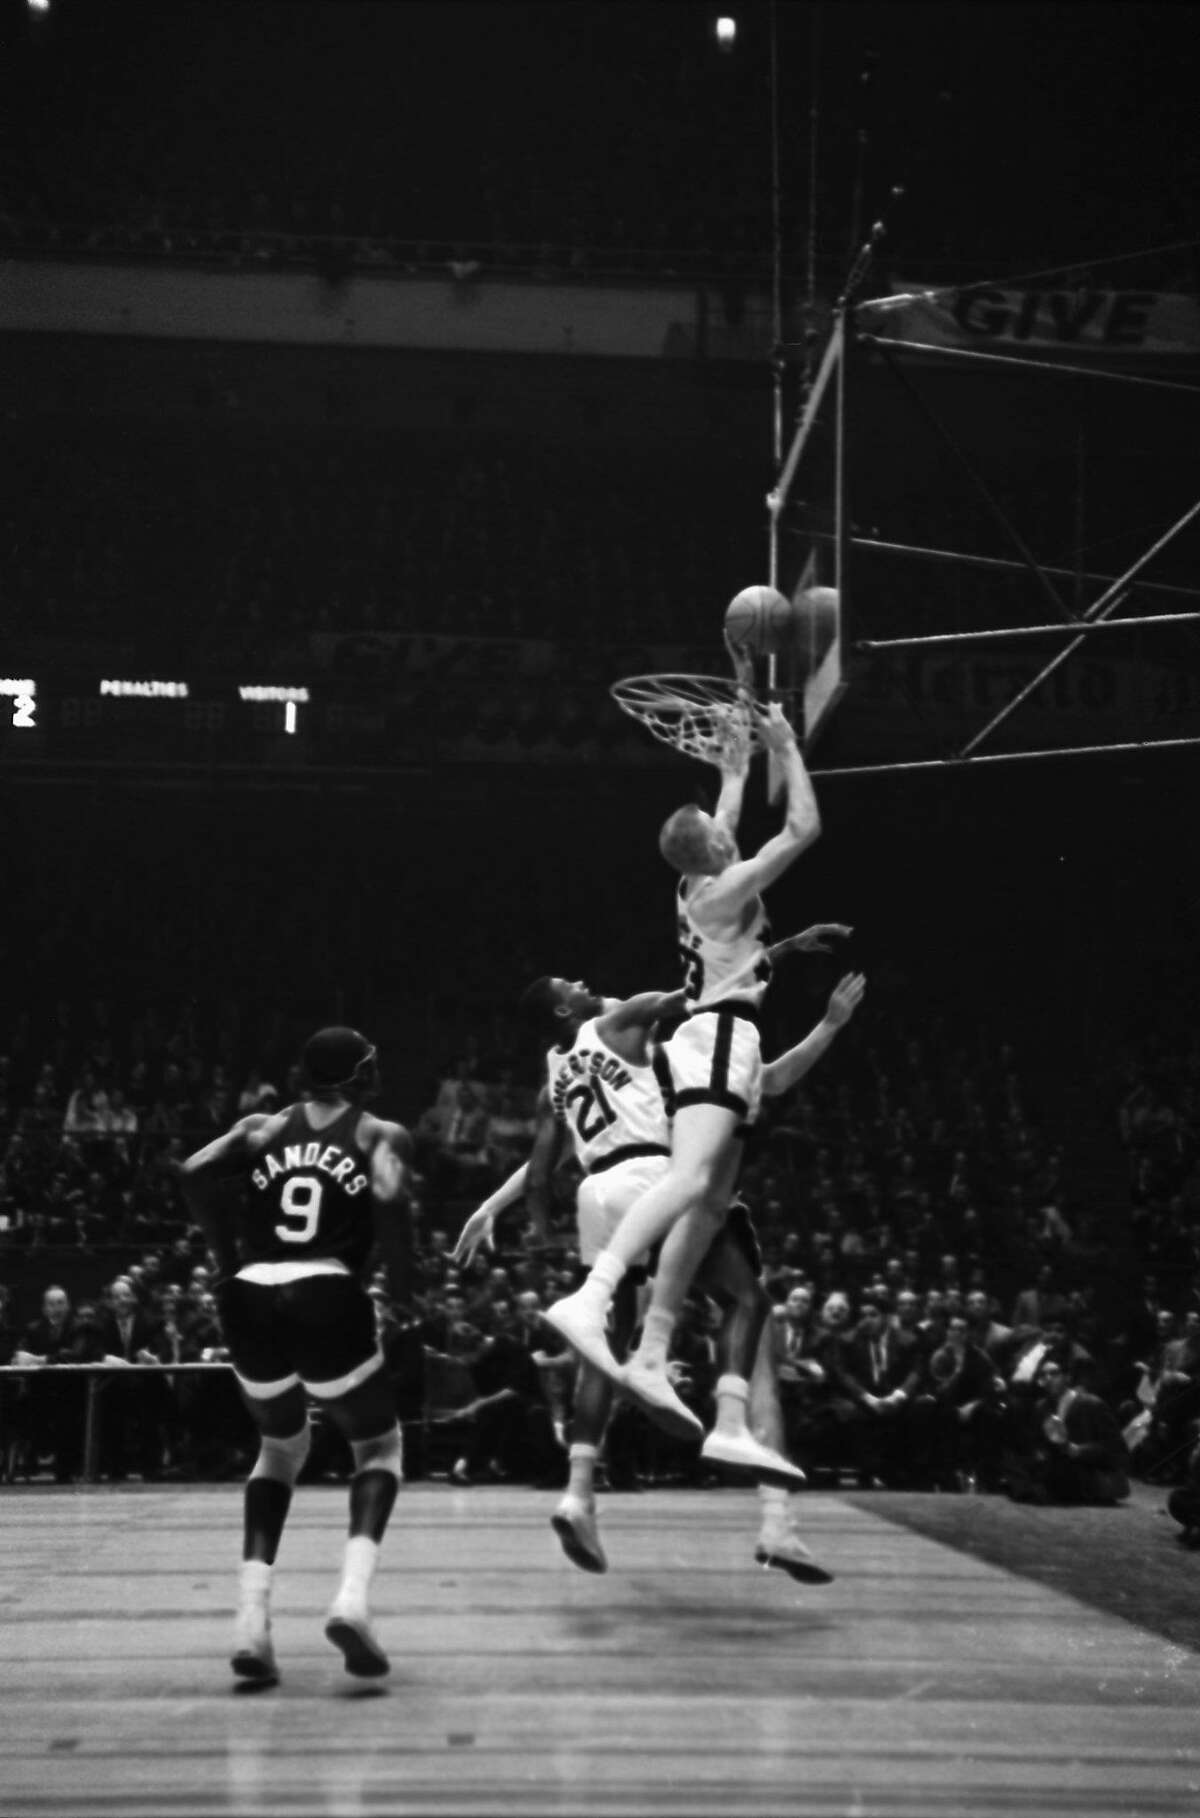 (Original Caption) In a burst of over-enthusiasm, Darrell Imhoff, of the University of California, reaches through the hoop to snare the ball as Oscar Robertson (no. 21), of the University of Cincinnati, watches. Goaltending was called on the play during the East-West All-Star game here, March 26th. The East All-Stars scored a close 67-66 victory over the West.